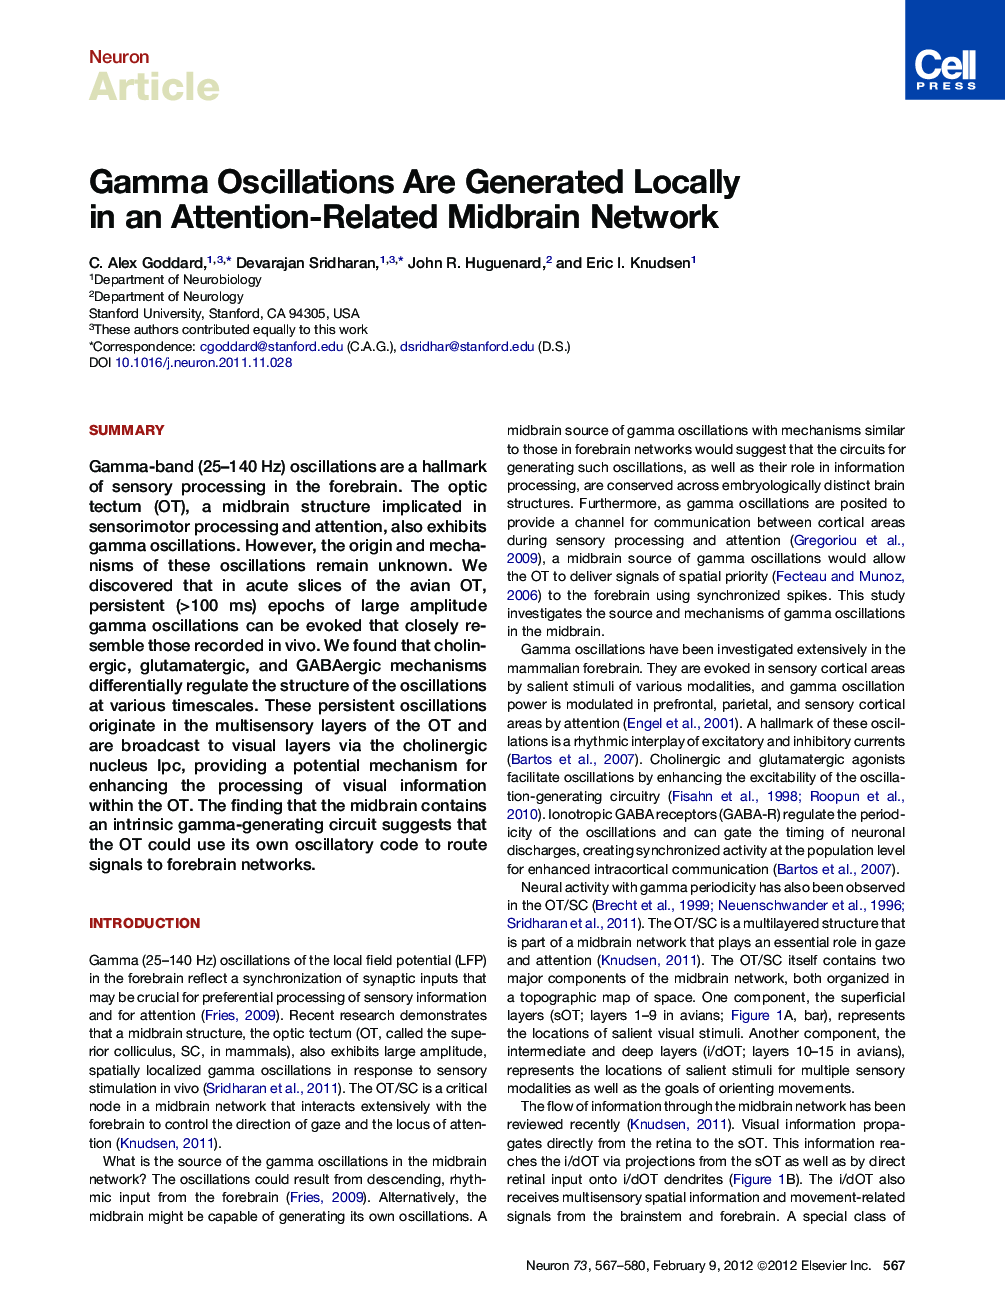 Gamma Oscillations Are Generated Locally in an Attention-Related Midbrain Network